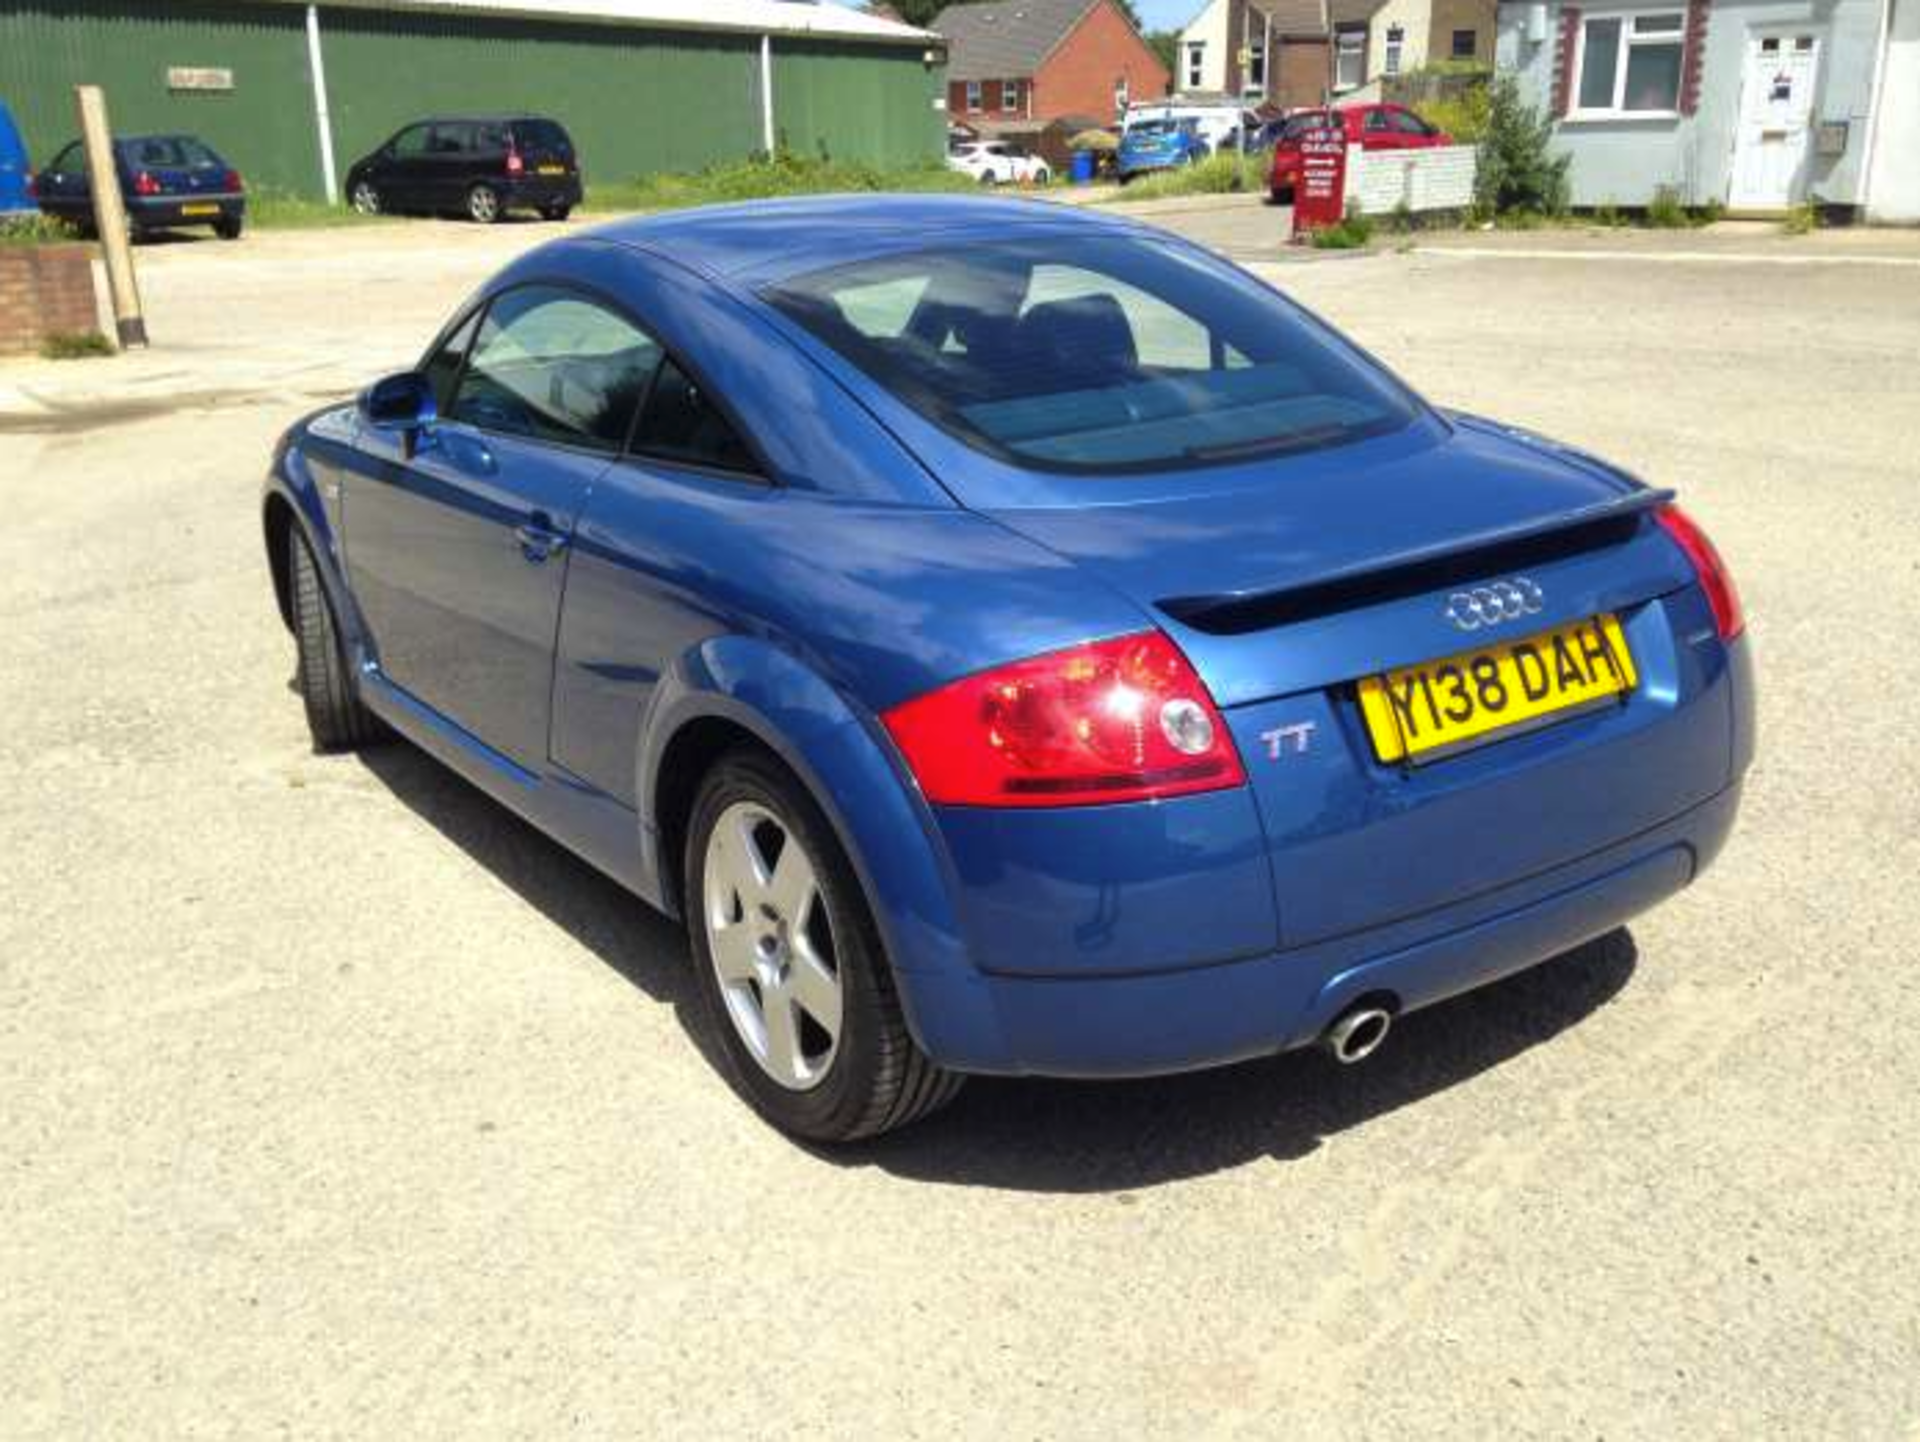 2001 AUDI TT 180 coupe - Image 4 of 14